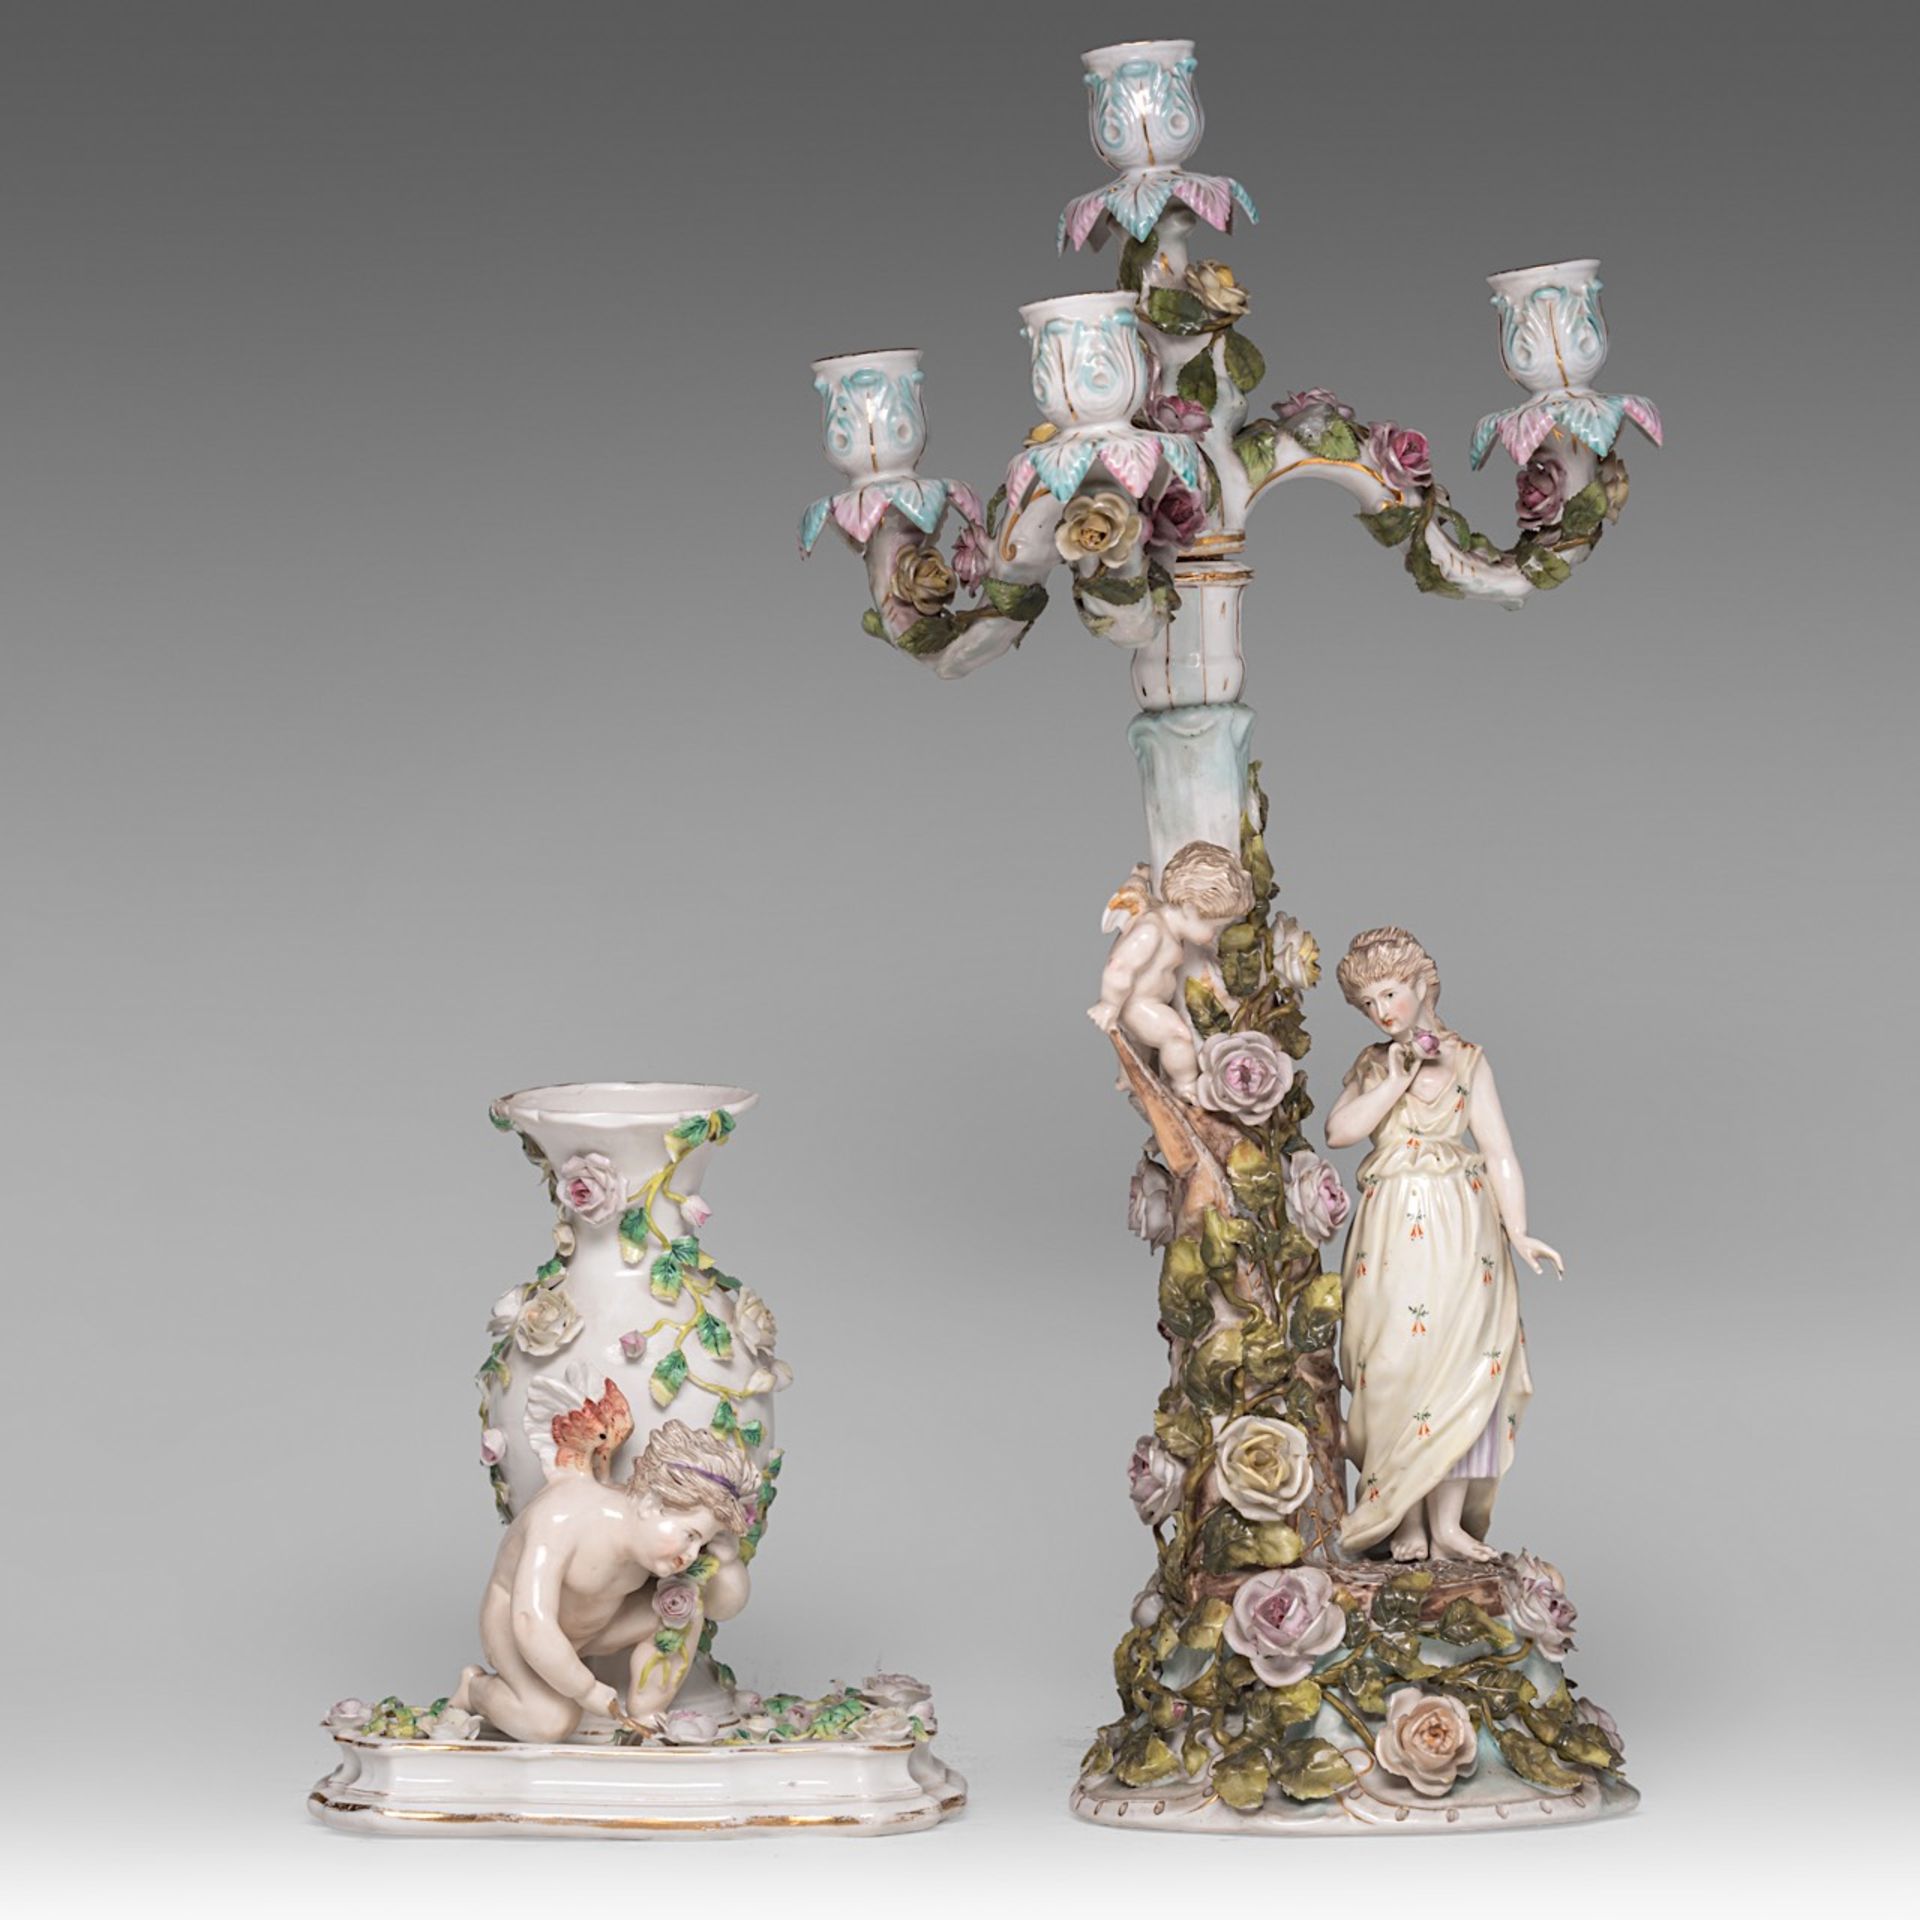 A collection of polychrome decorated Saxon porcelain figurines and a candelabra, H 51,5 cm (tallest) - Image 2 of 13